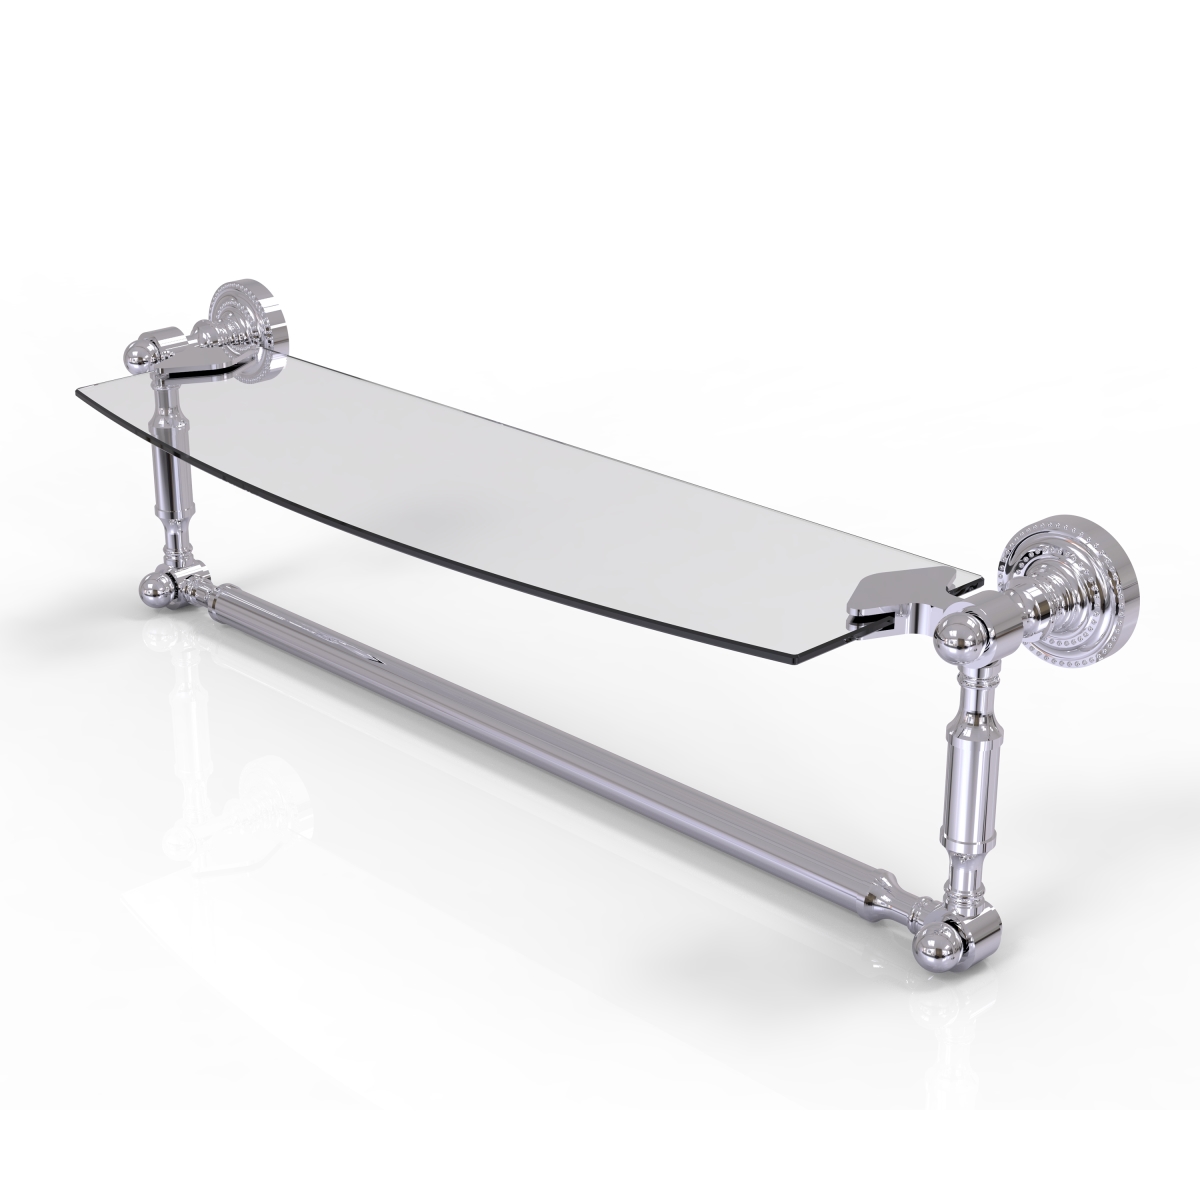 Picture of Allied Brass DT-33TB-18-PC 18 in. Dottingham Glass Vanity Shelf with Integrated Towel Bar, Polished Chrome